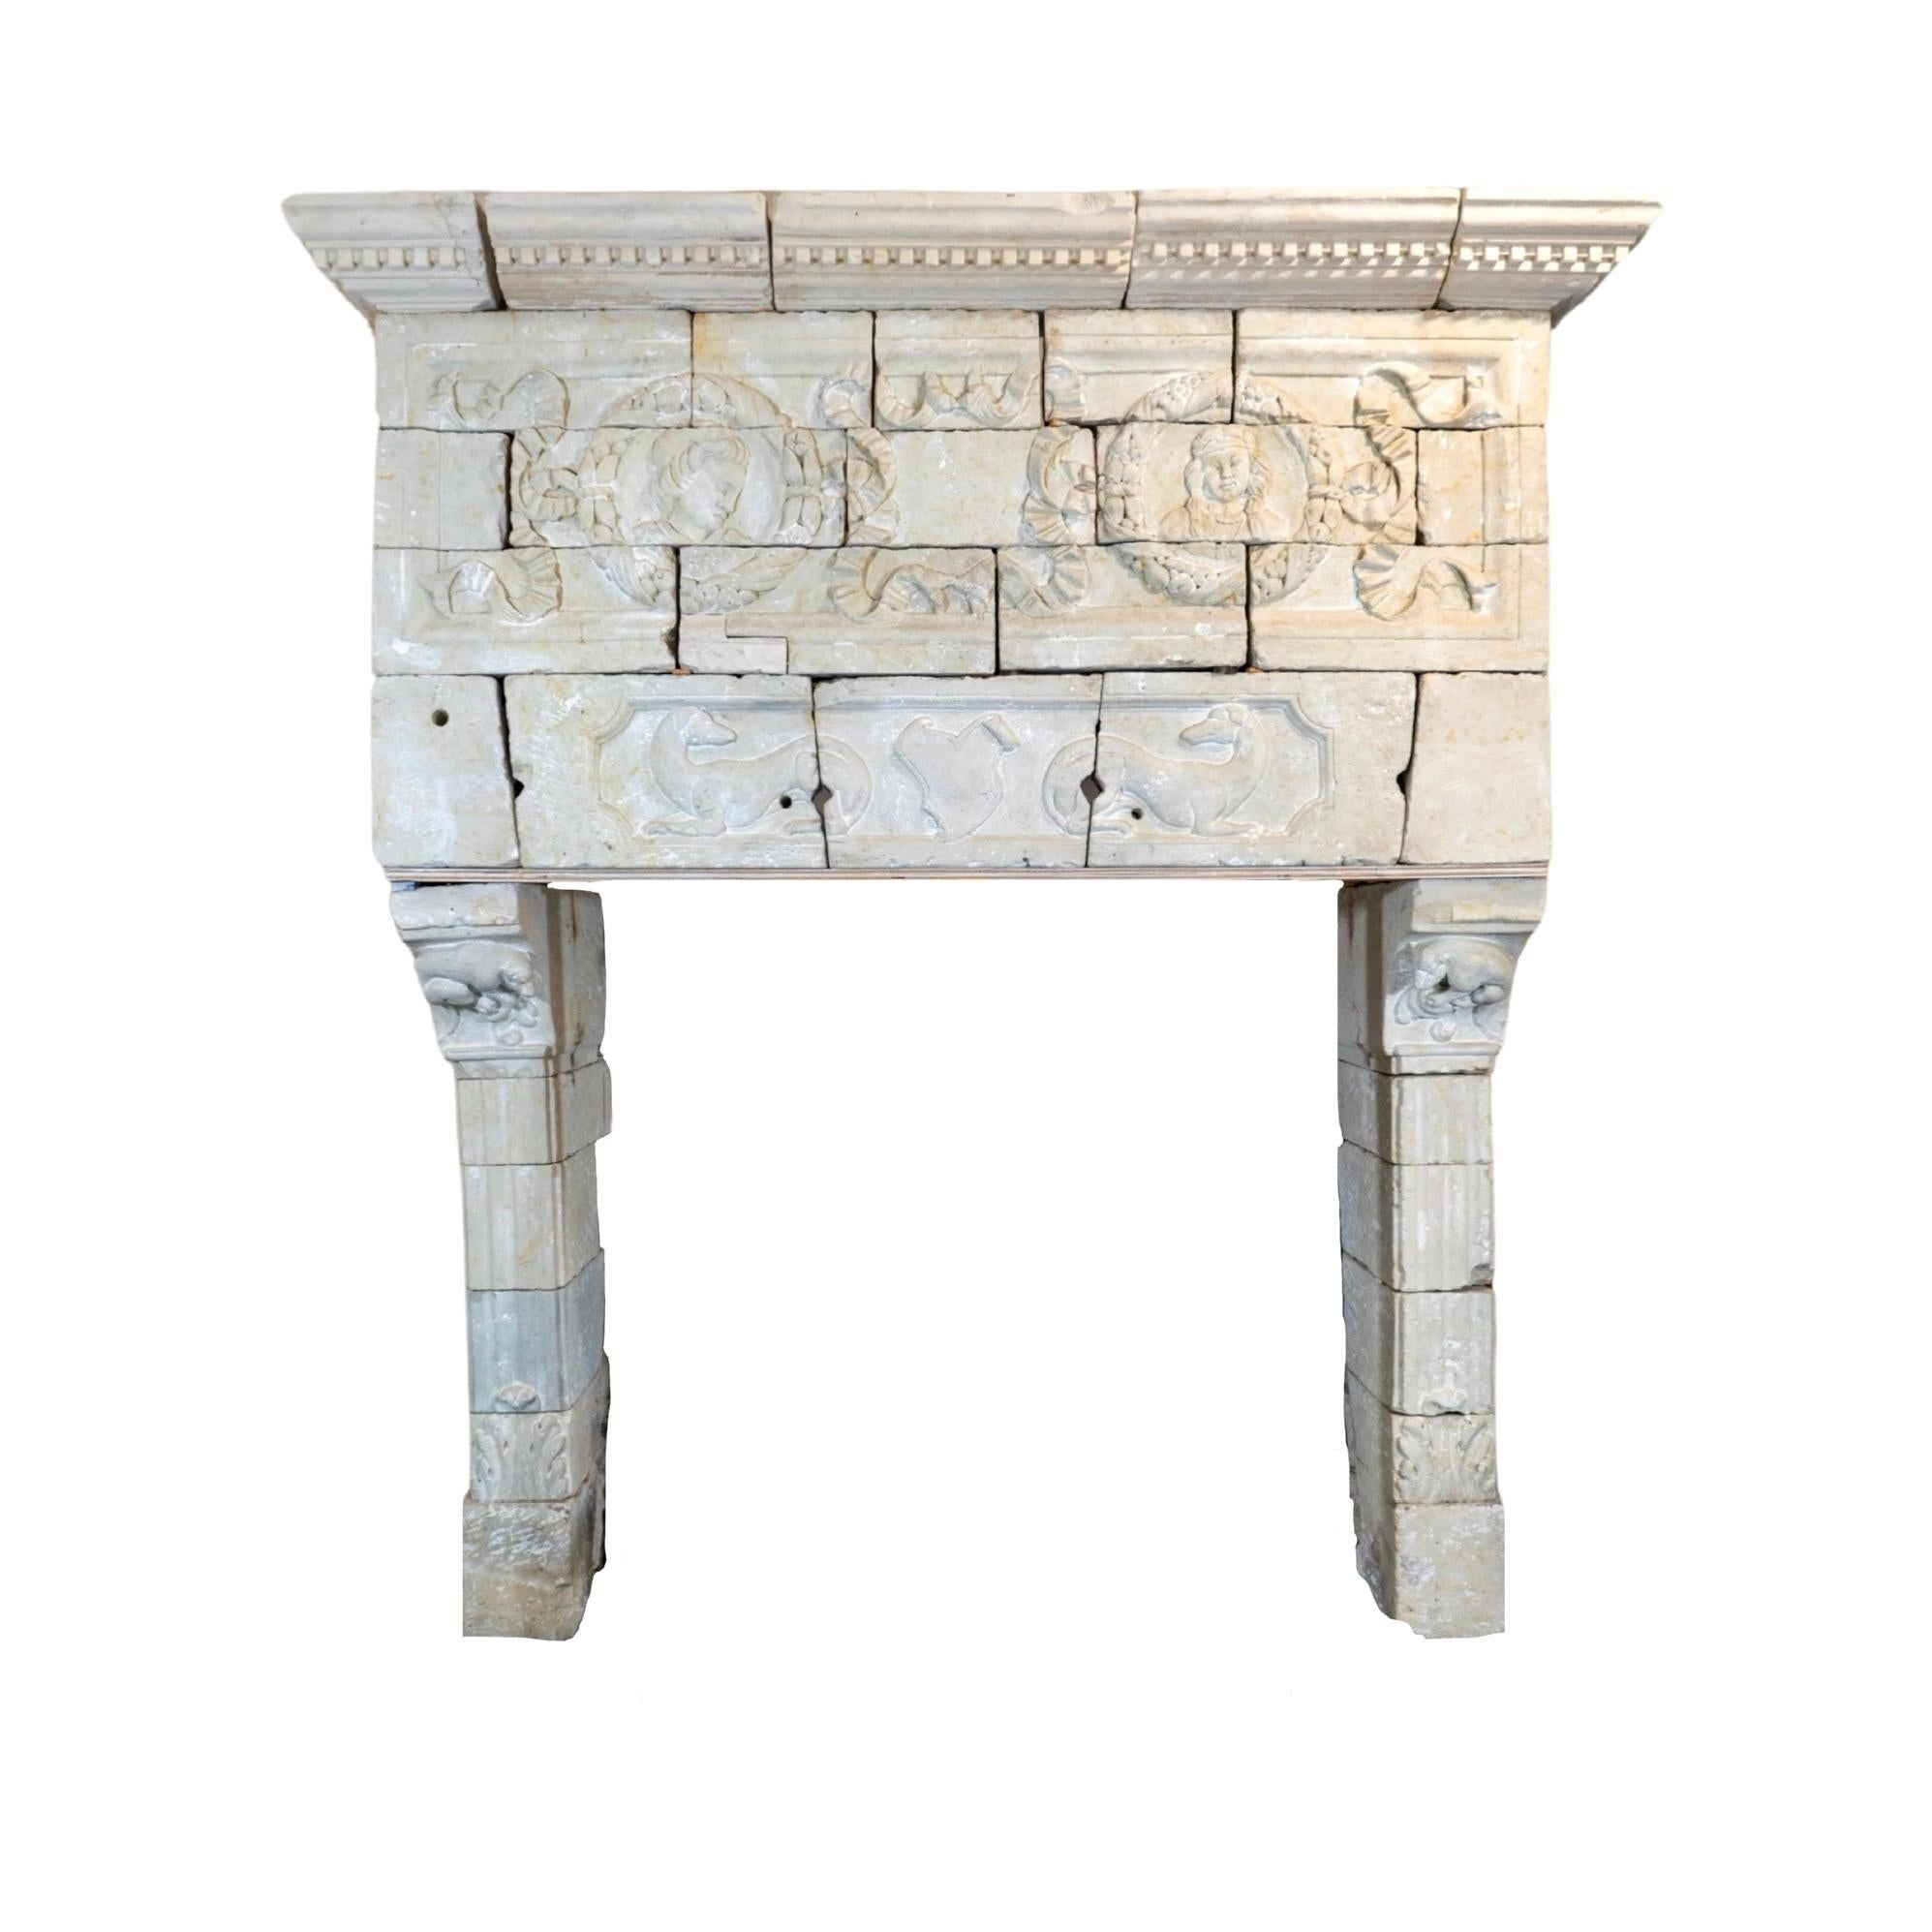 Expertly crafted from French limestone, this massive fireplace mantel is a true Renaissance treasure. Originating from the Loire Valley in France, this 1620 Betrothal Mantel features intricate carvings that exude elegance and sophistication. With